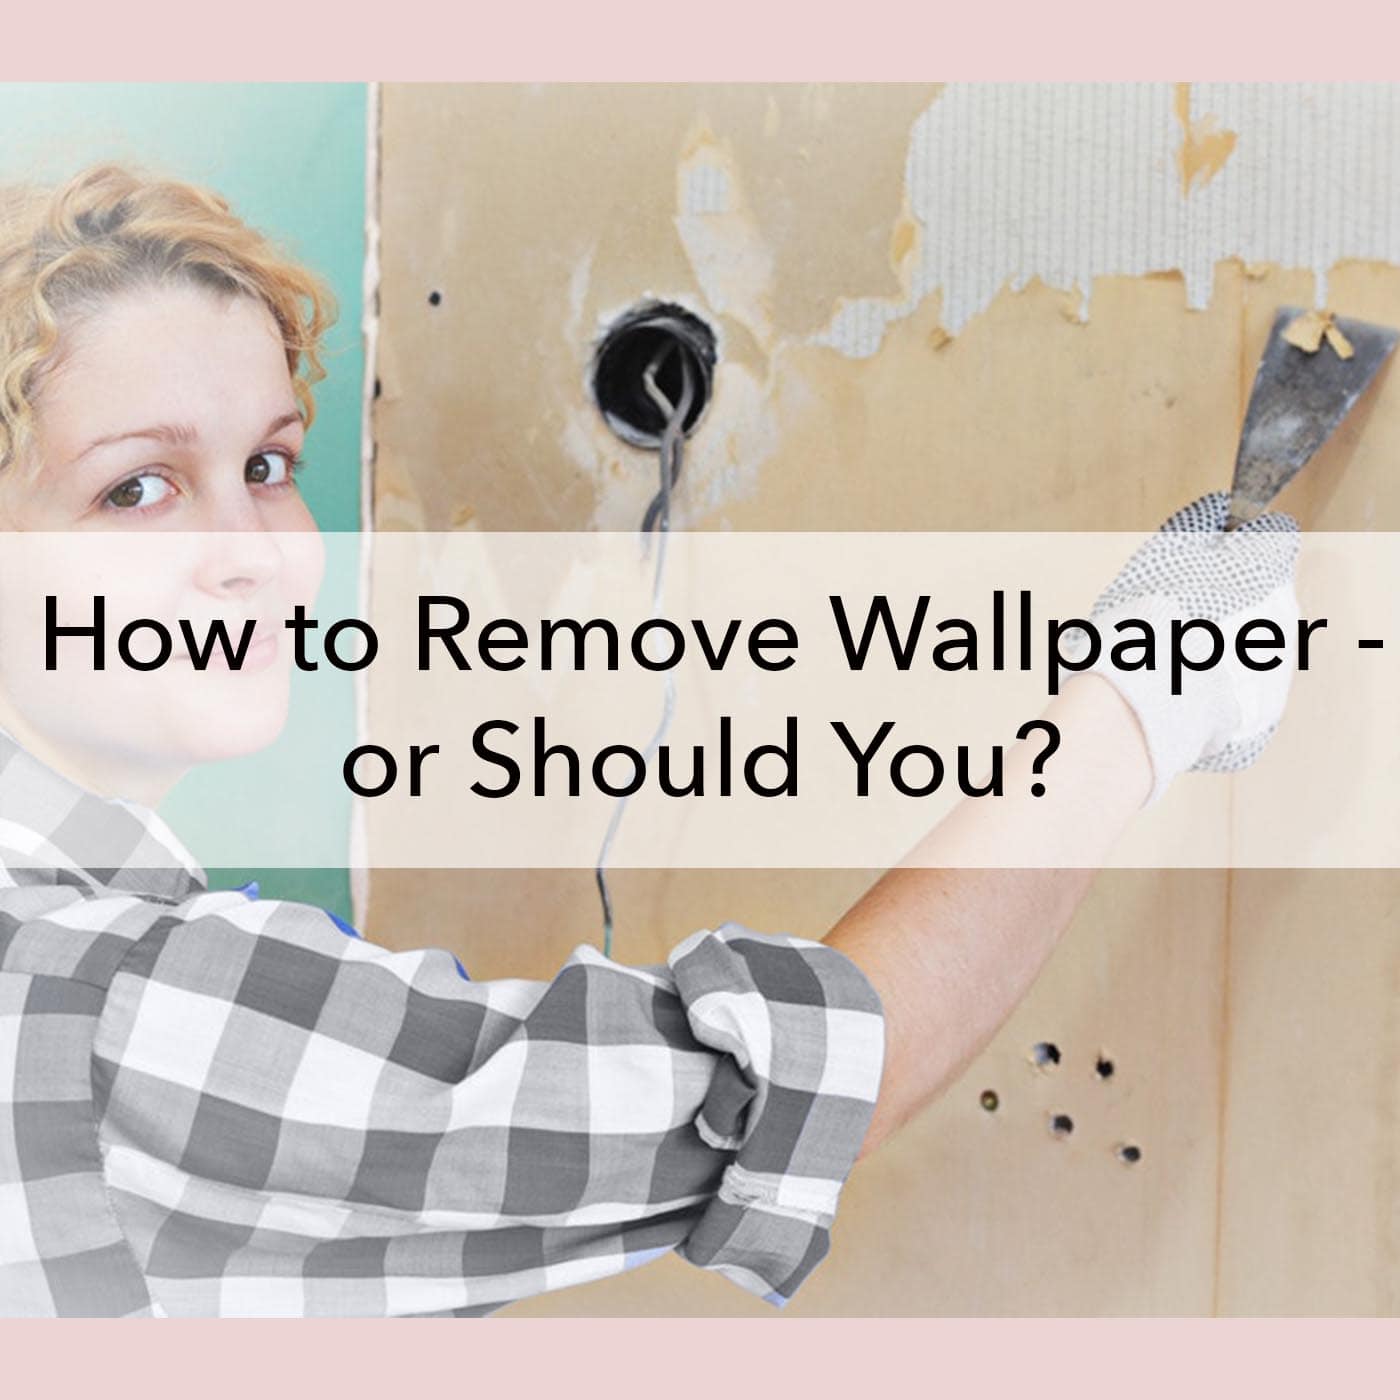 How to Remove Wallpaper - 4 Different Scenarios and What to Do